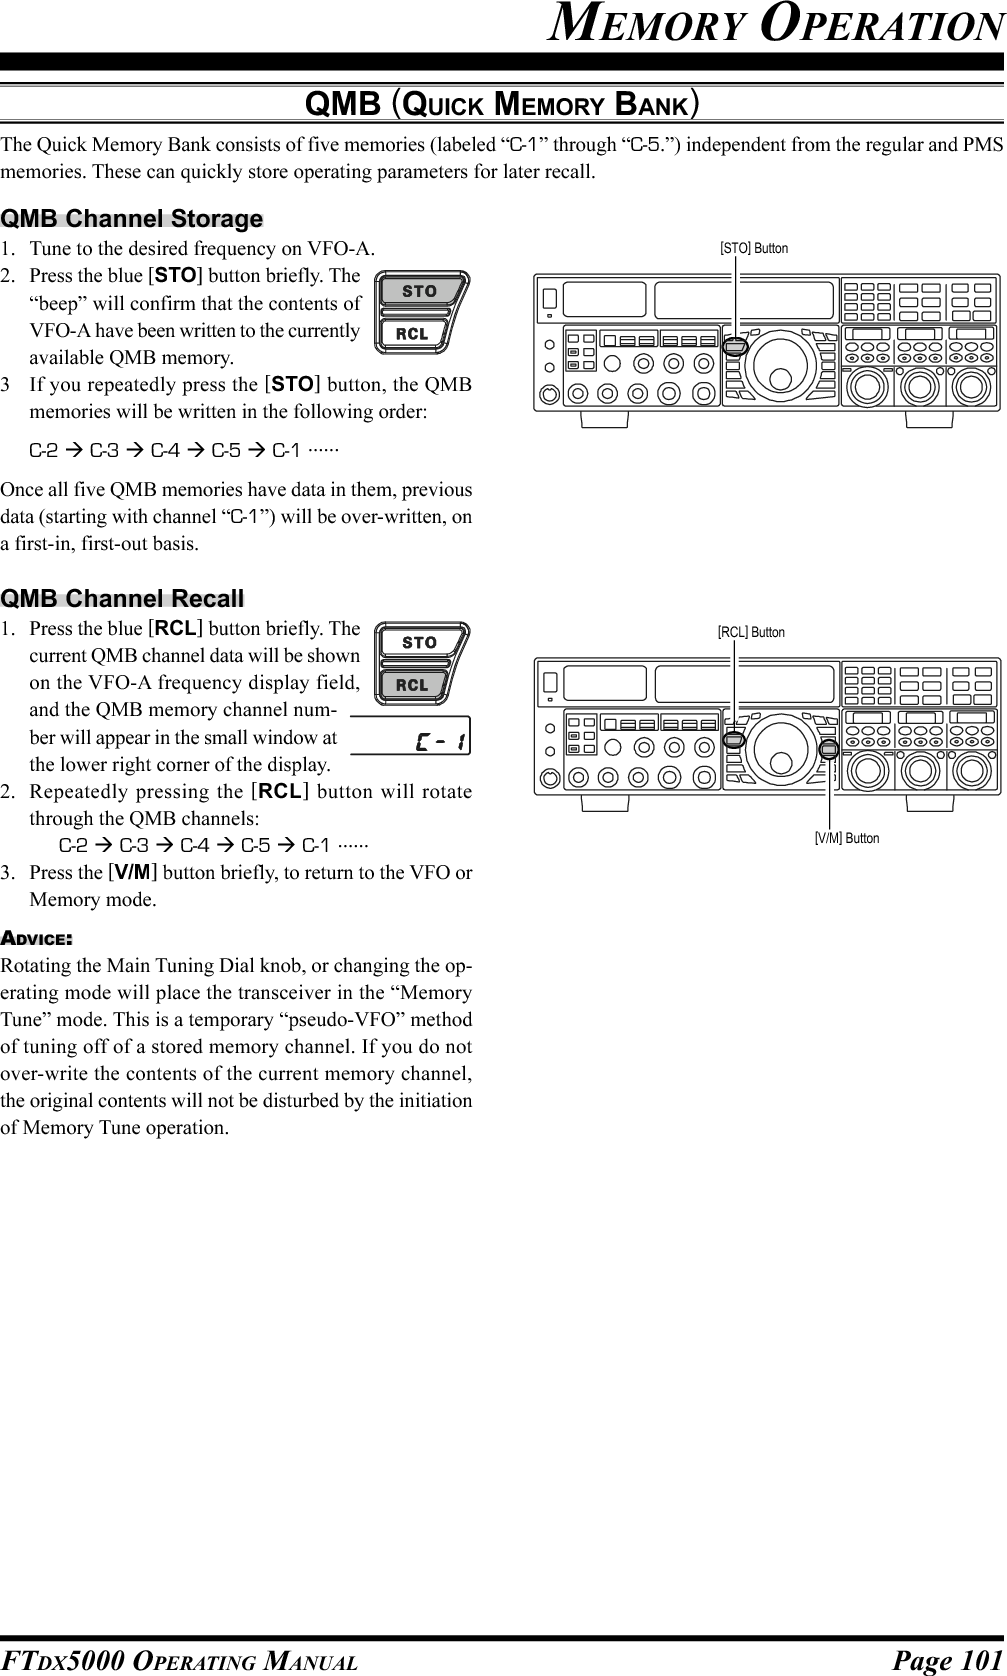 Page 101FTDX5000 OPERATING MANUALMEMORY OPERATIONQMB (QUICK MEMORY BANK)The Quick Memory Bank consists of five memories (labeled “C-1” through “C-5.”) independent from the regular and PMSmemories. These can quickly store operating parameters for later recall.QMB Channel Storage1. Tune to the desired frequency on VFO-A.2. Press the blue [STO] button briefly. The“beep” will confirm that the contents ofVFO-A have been written to the currentlyavailable QMB memory.3 If you repeatedly press the [STO] button, the QMBmemories will be written in the following order:C-2  C-3  C-4  C-5  C-1 ......Once all five QMB memories have data in them, previousdata (starting with channel “C-1”) will be over-written, ona first-in, first-out basis.QMB Channel Recall1. Press the blue [RCL] button briefly. Thecurrent QMB channel data will be shownon the VFO-A frequency display field,and the QMB memory channel num-ber will appear in the small window atthe lower right corner of the display.2. Repeatedly pressing the [RCL] button will rotatethrough the QMB channels:C-2  C-3  C-4  C-5  C-1 ......3. Press the [V/M] button briefly, to return to the VFO orMemory mode.ADVICE:Rotating the Main Tuning Dial knob, or changing the op-erating mode will place the transceiver in the “MemoryTune” mode. This is a temporary “pseudo-VFO” methodof tuning off of a stored memory channel. If you do notover-write the contents of the current memory channel,the original contents will not be disturbed by the initiationof Memory Tune operation.[STO] Button[RCL] Button[V/M] Button